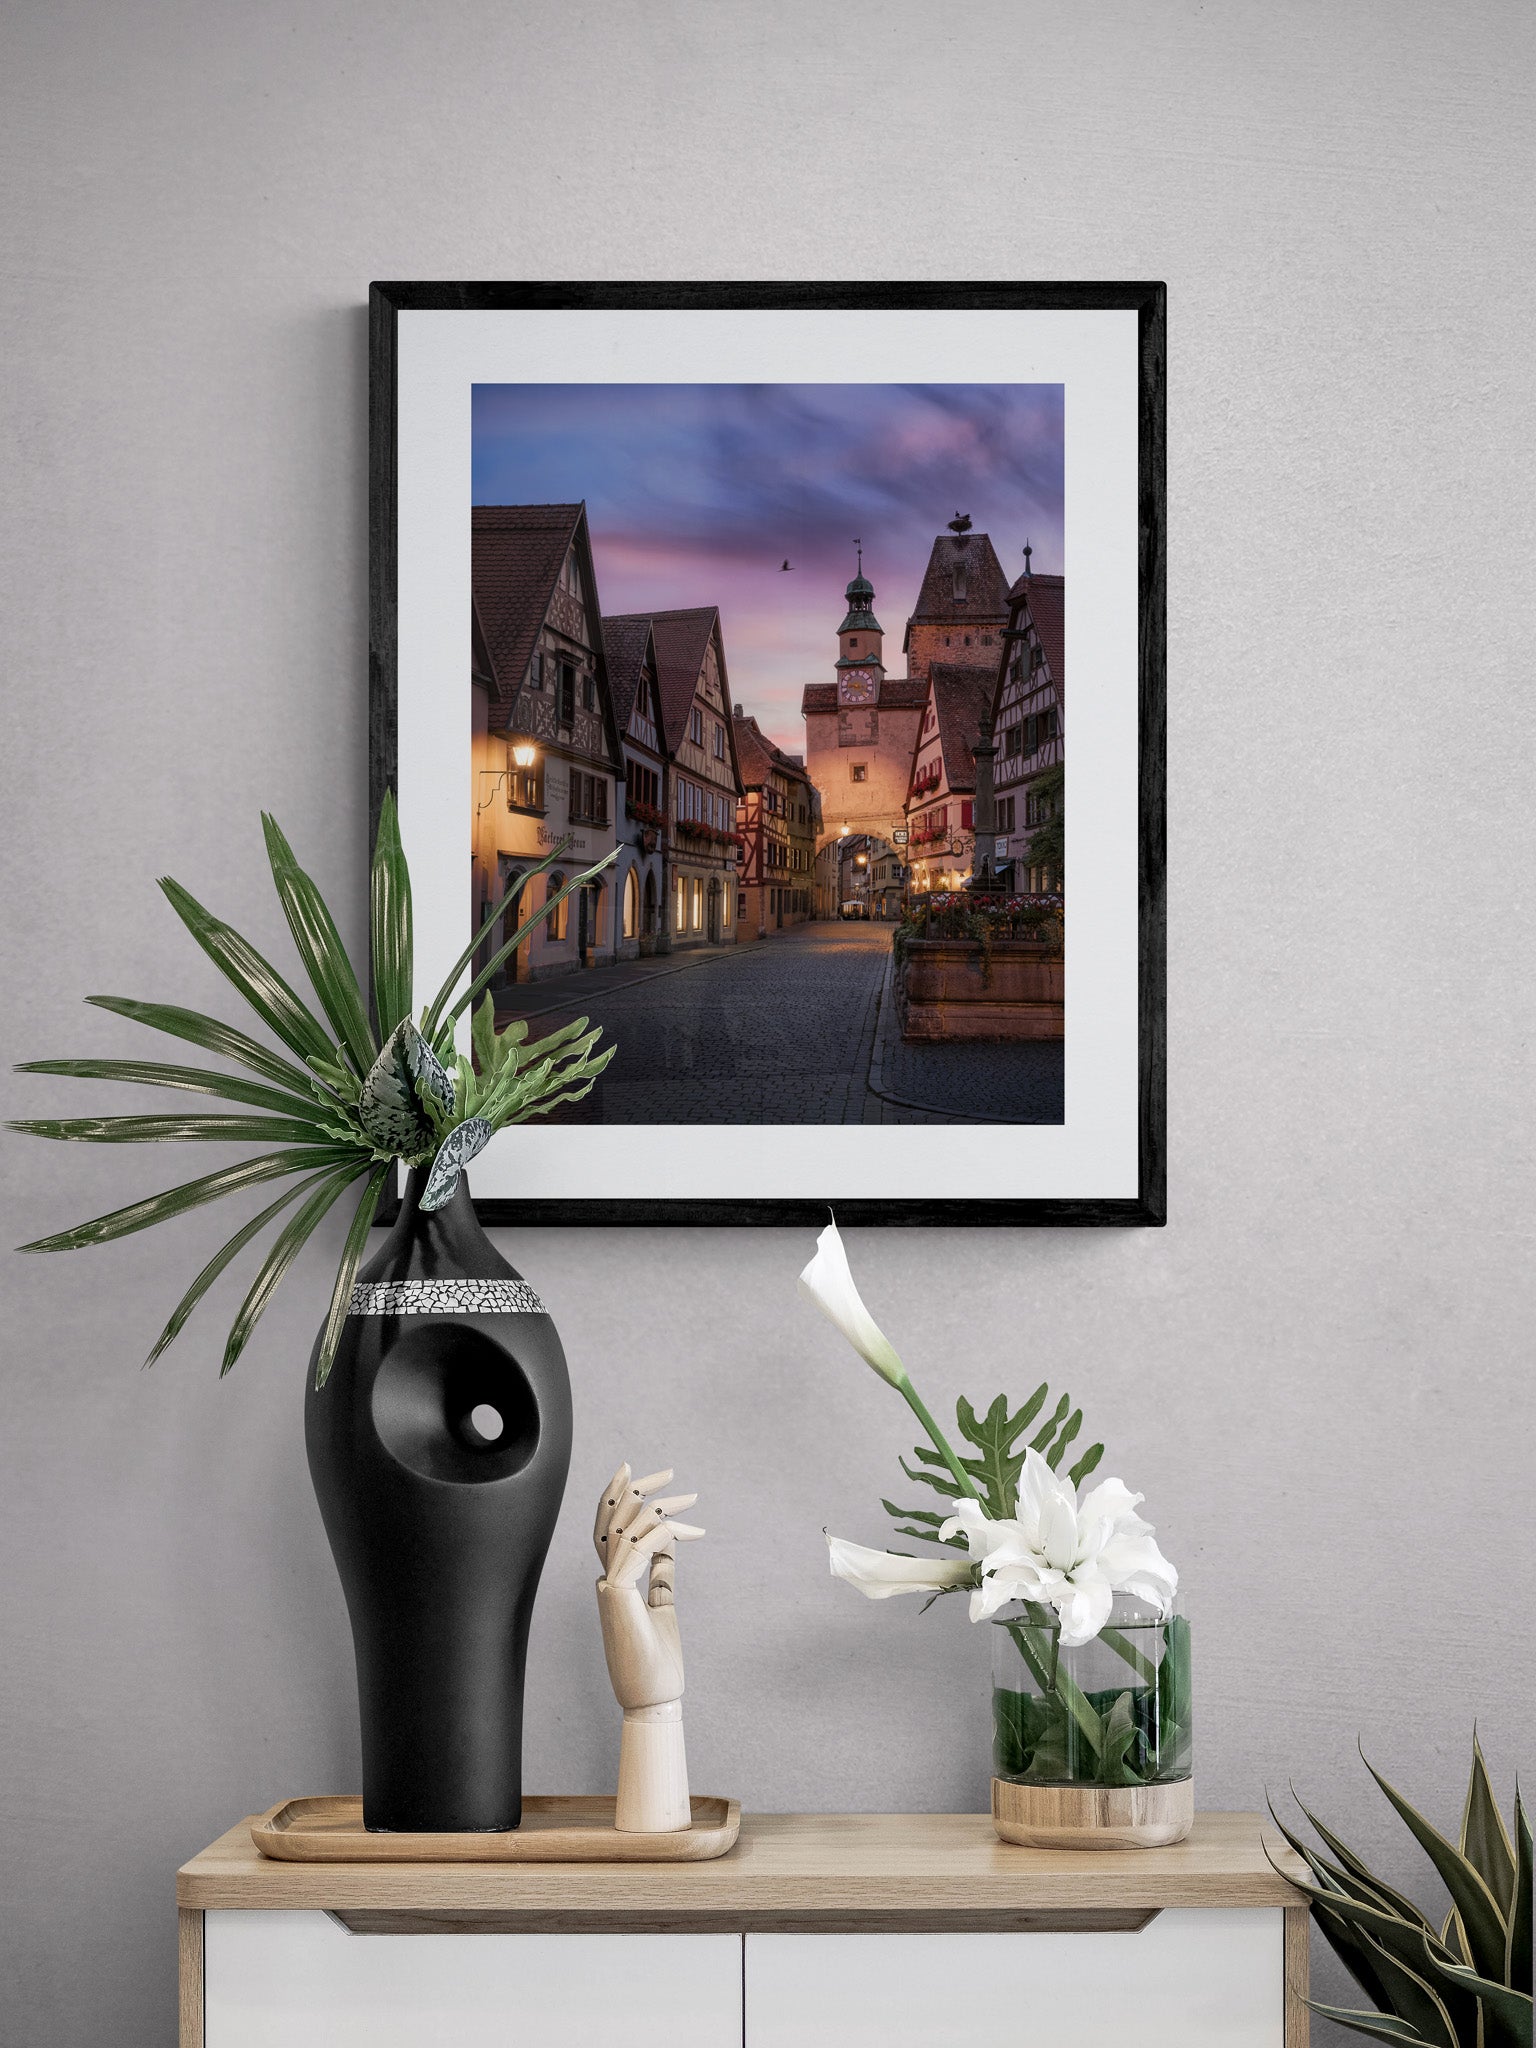 Image Title: Daddy is coming Photographer: Marcus Danz Location: Rothenburg ob der Tauber, Germany  Image description: Beautiful sunset view of the Markus Tower n the romantic town of Rothenburg ob der Tauber. High quality Fine Art print up to 36 inch / around 90 centimeters on Hahnemühle paper available. Medium variant over sideboard.